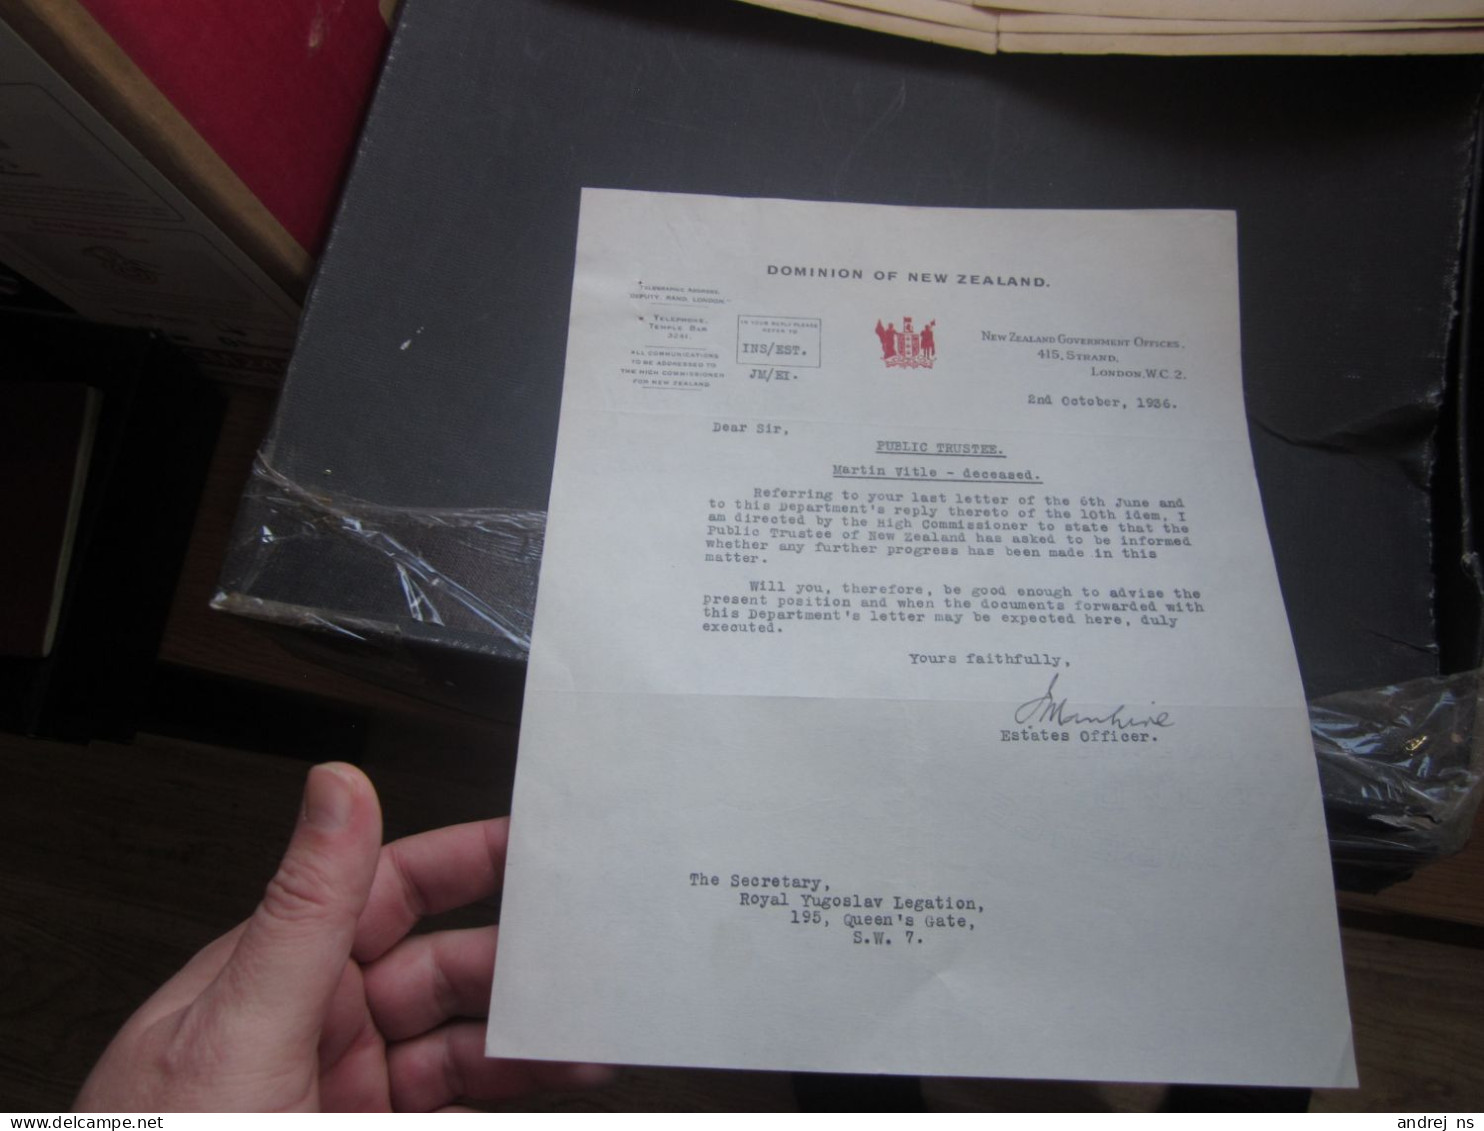 Dominion Of New Zealand 1936 Estates Officer Signatures  New Zealand Governments Offices London - Royaume-Uni